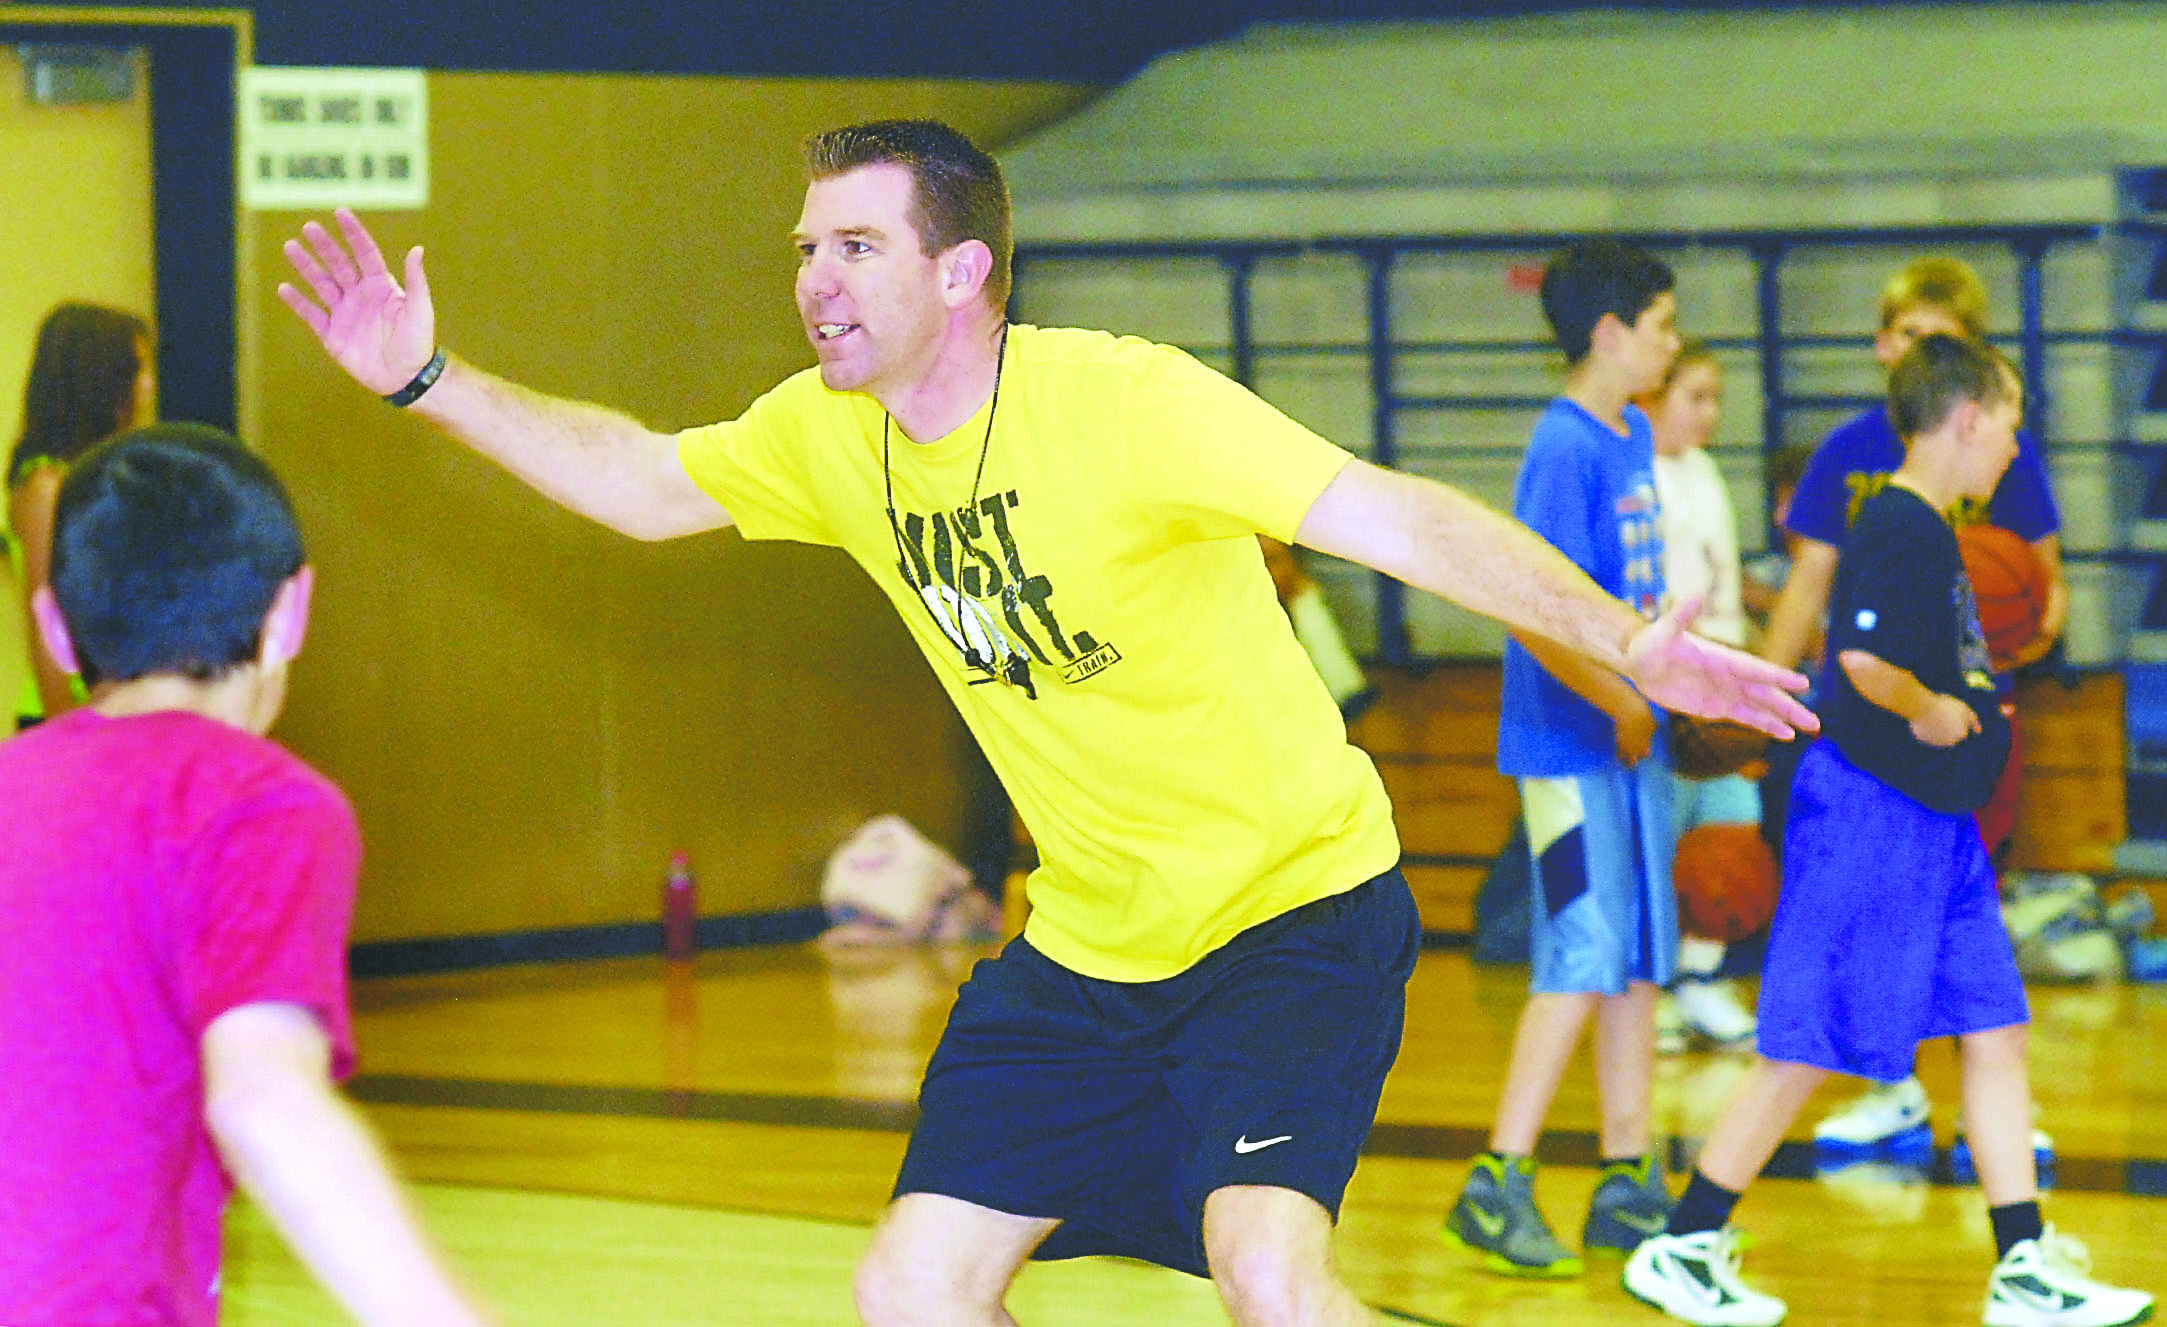 Peninsula College basketball head coach Lance Von Vogt conducts a youth basketball camp Tuesday on the college's Port Angeles campus. Von Vogt is leaving the Pirates for William Jessup University. -- Photo by Keith Thorpe/Peninsula Daily News